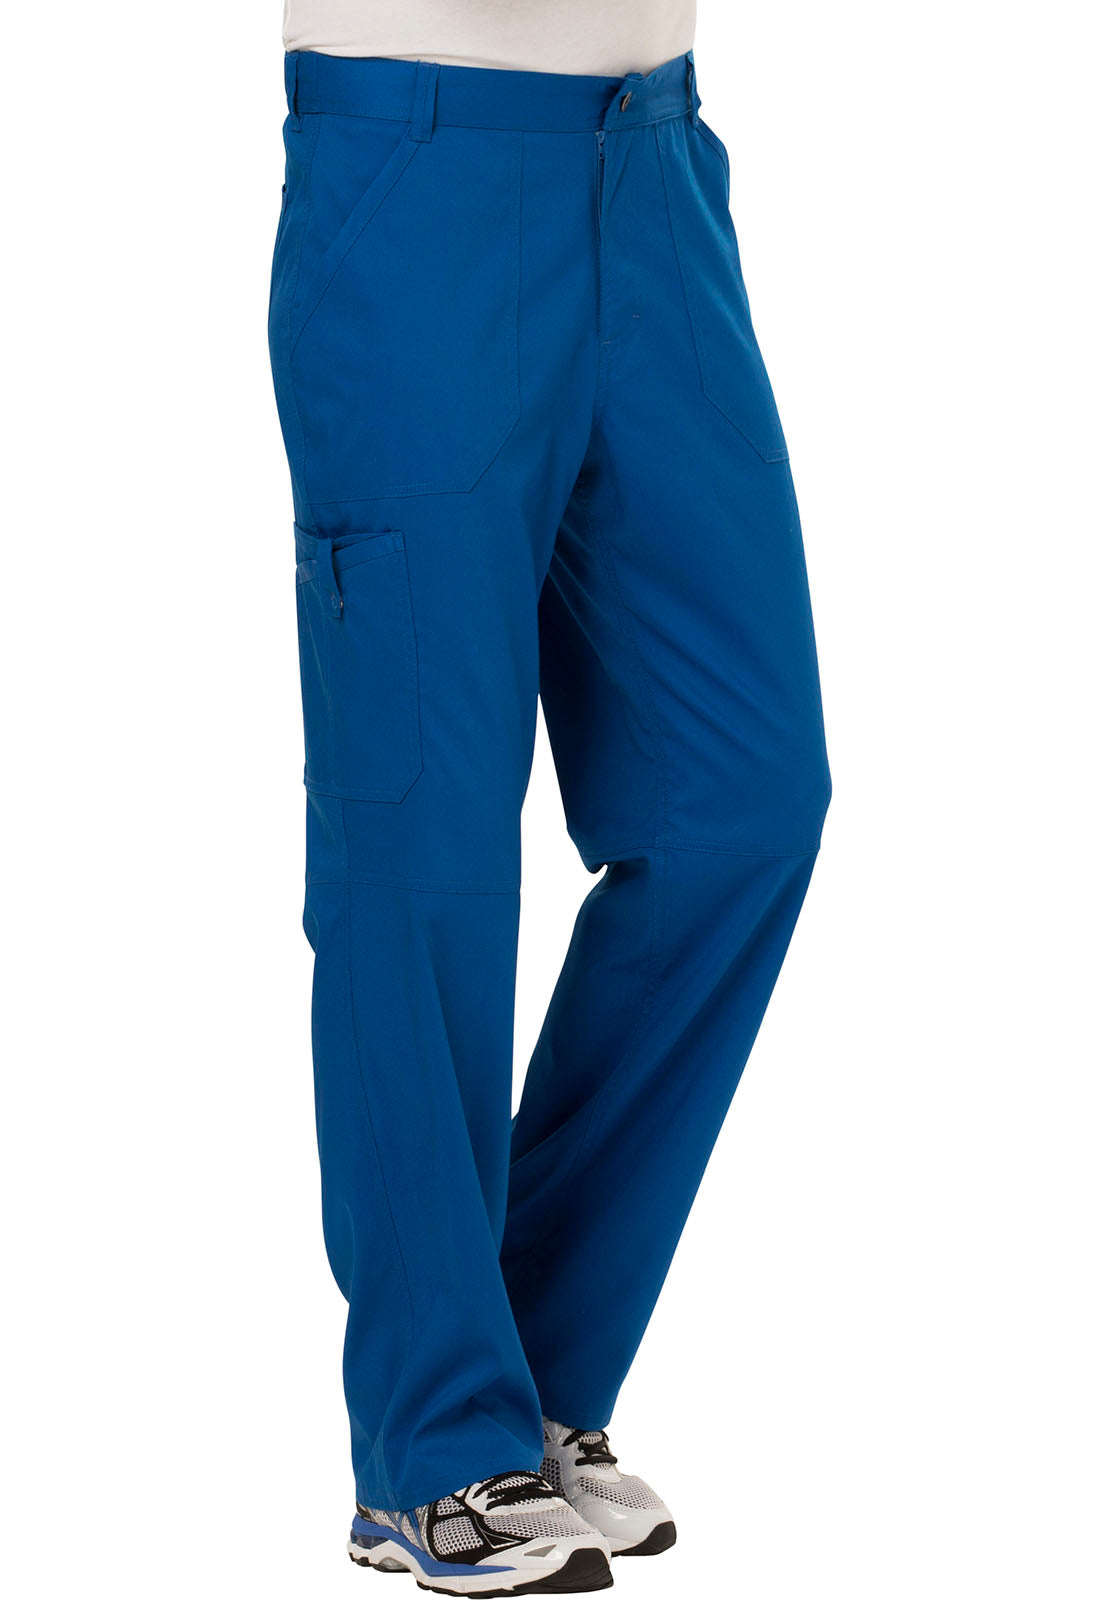 WW140 - Men's Fly Front Pant